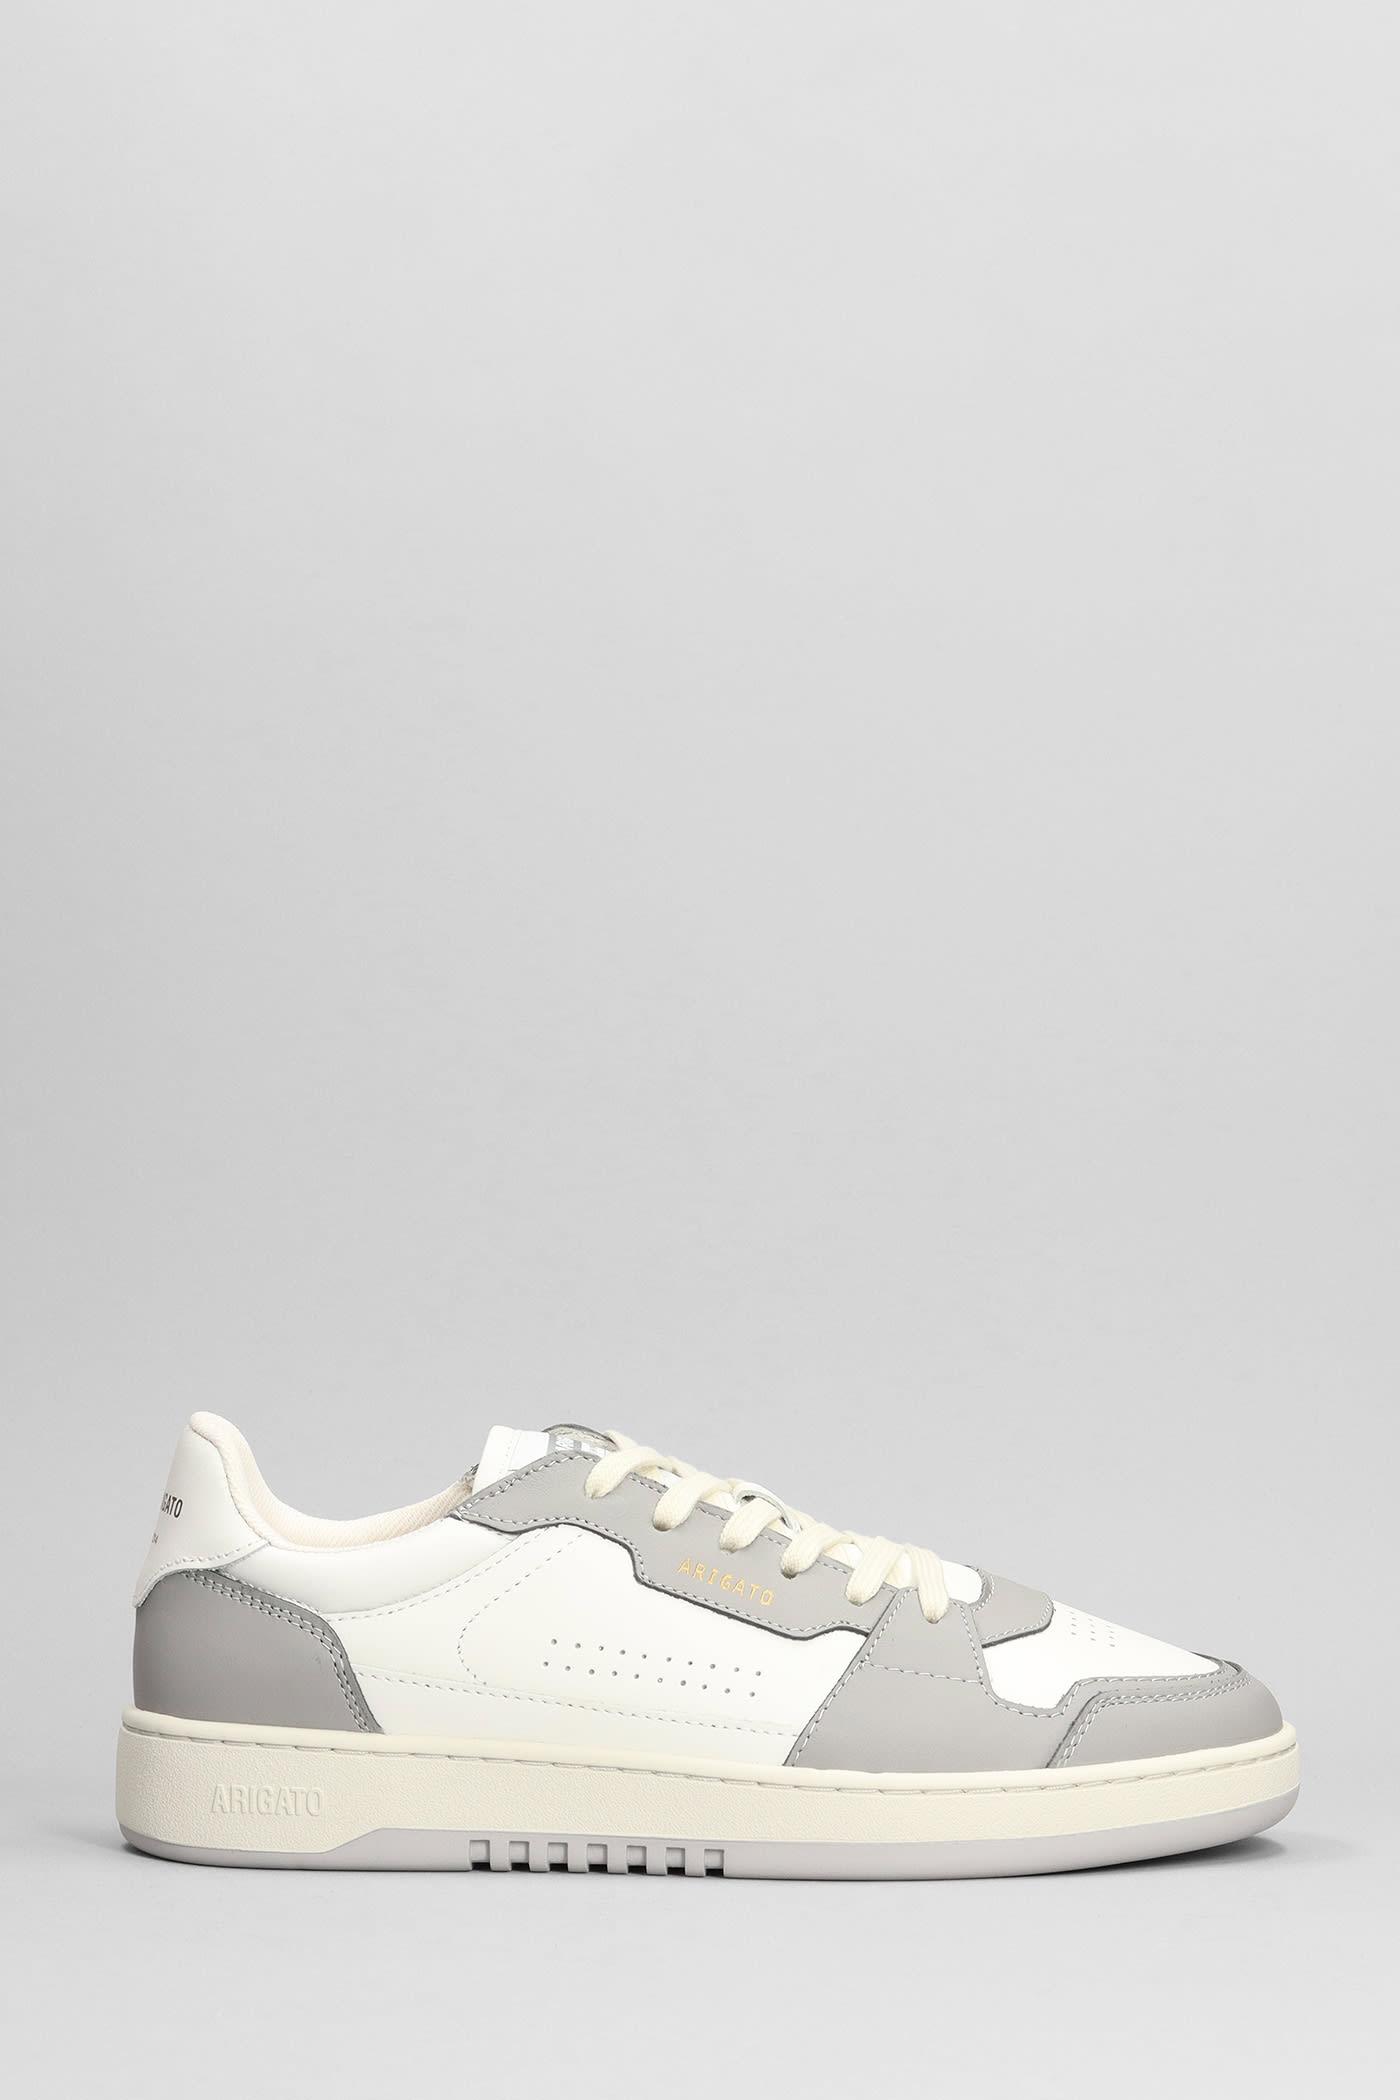 Axel Arigato Dice Lo Sneakers In Grey Leather in White for Men | Lyst